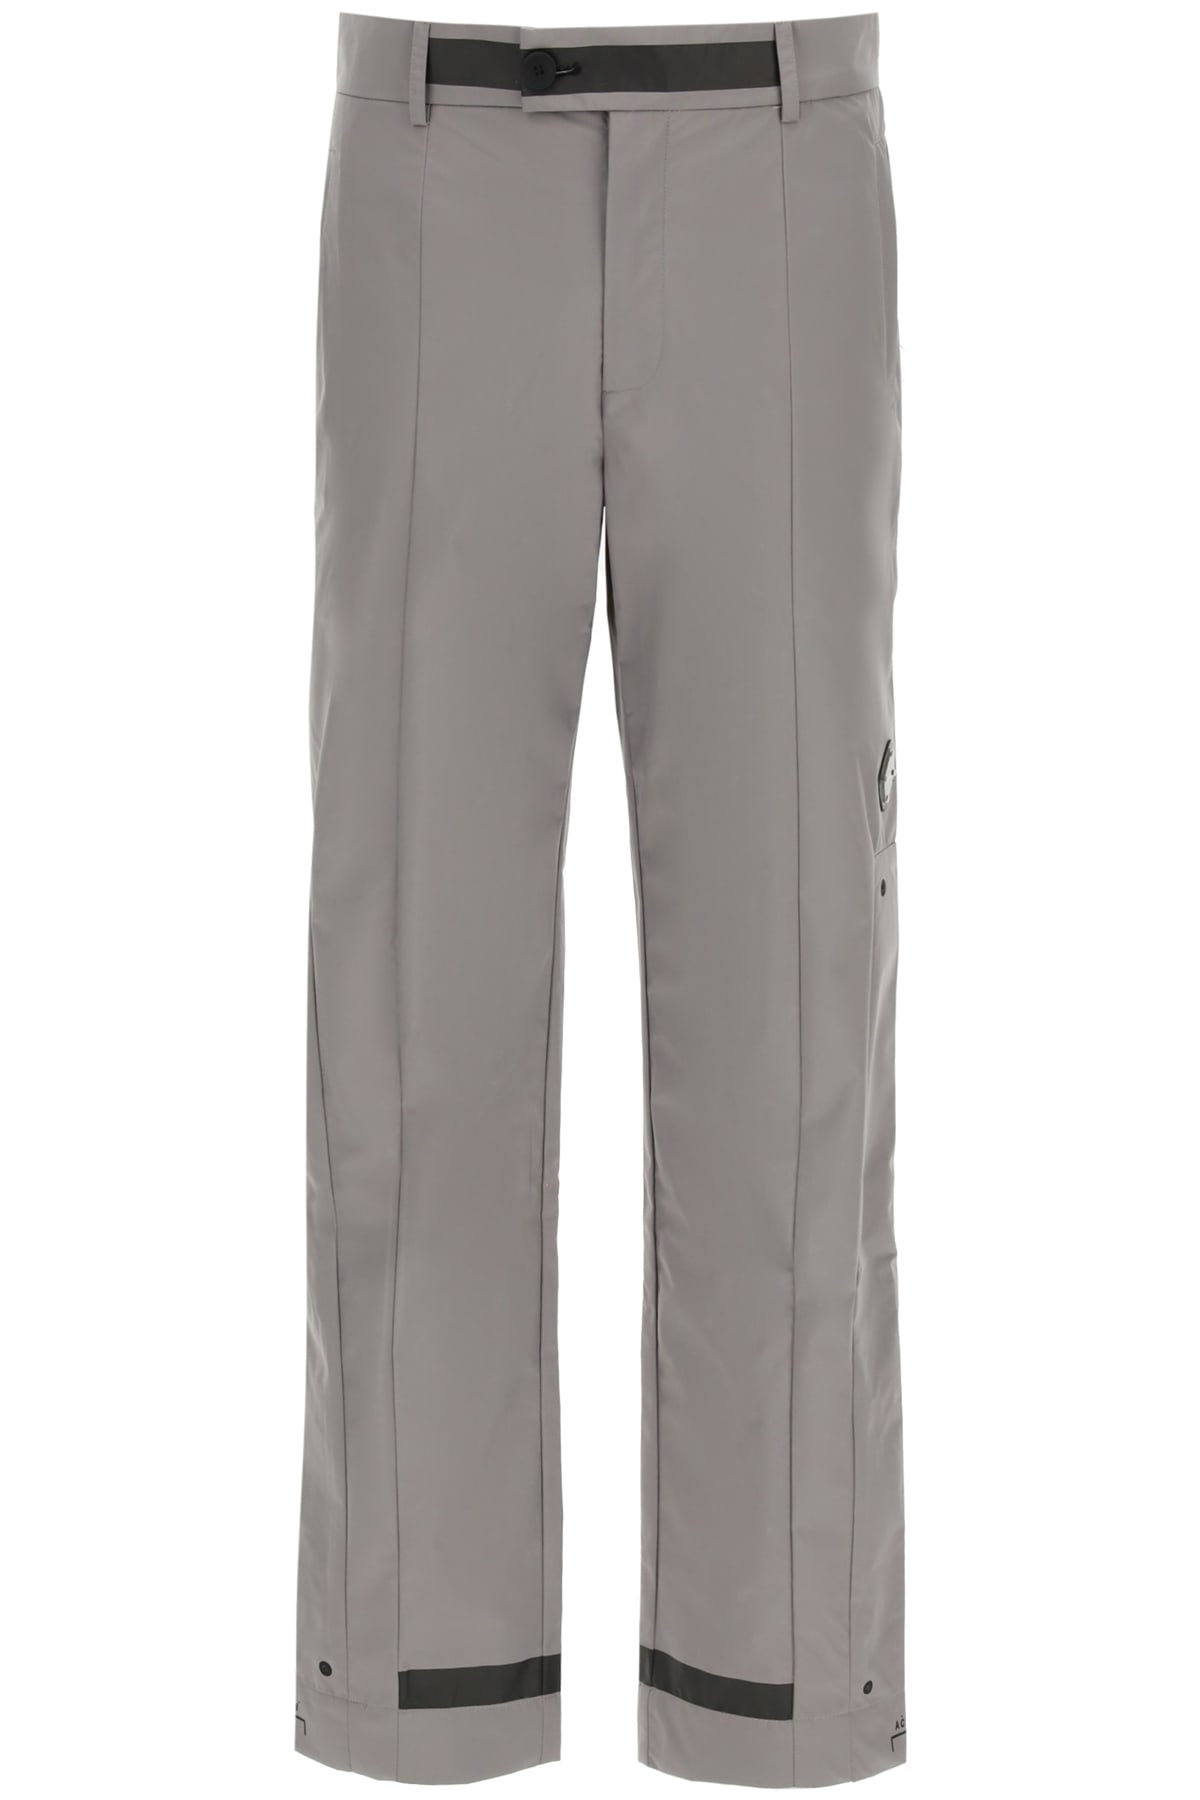 A-COLD-WALL Essential Technical Trousers